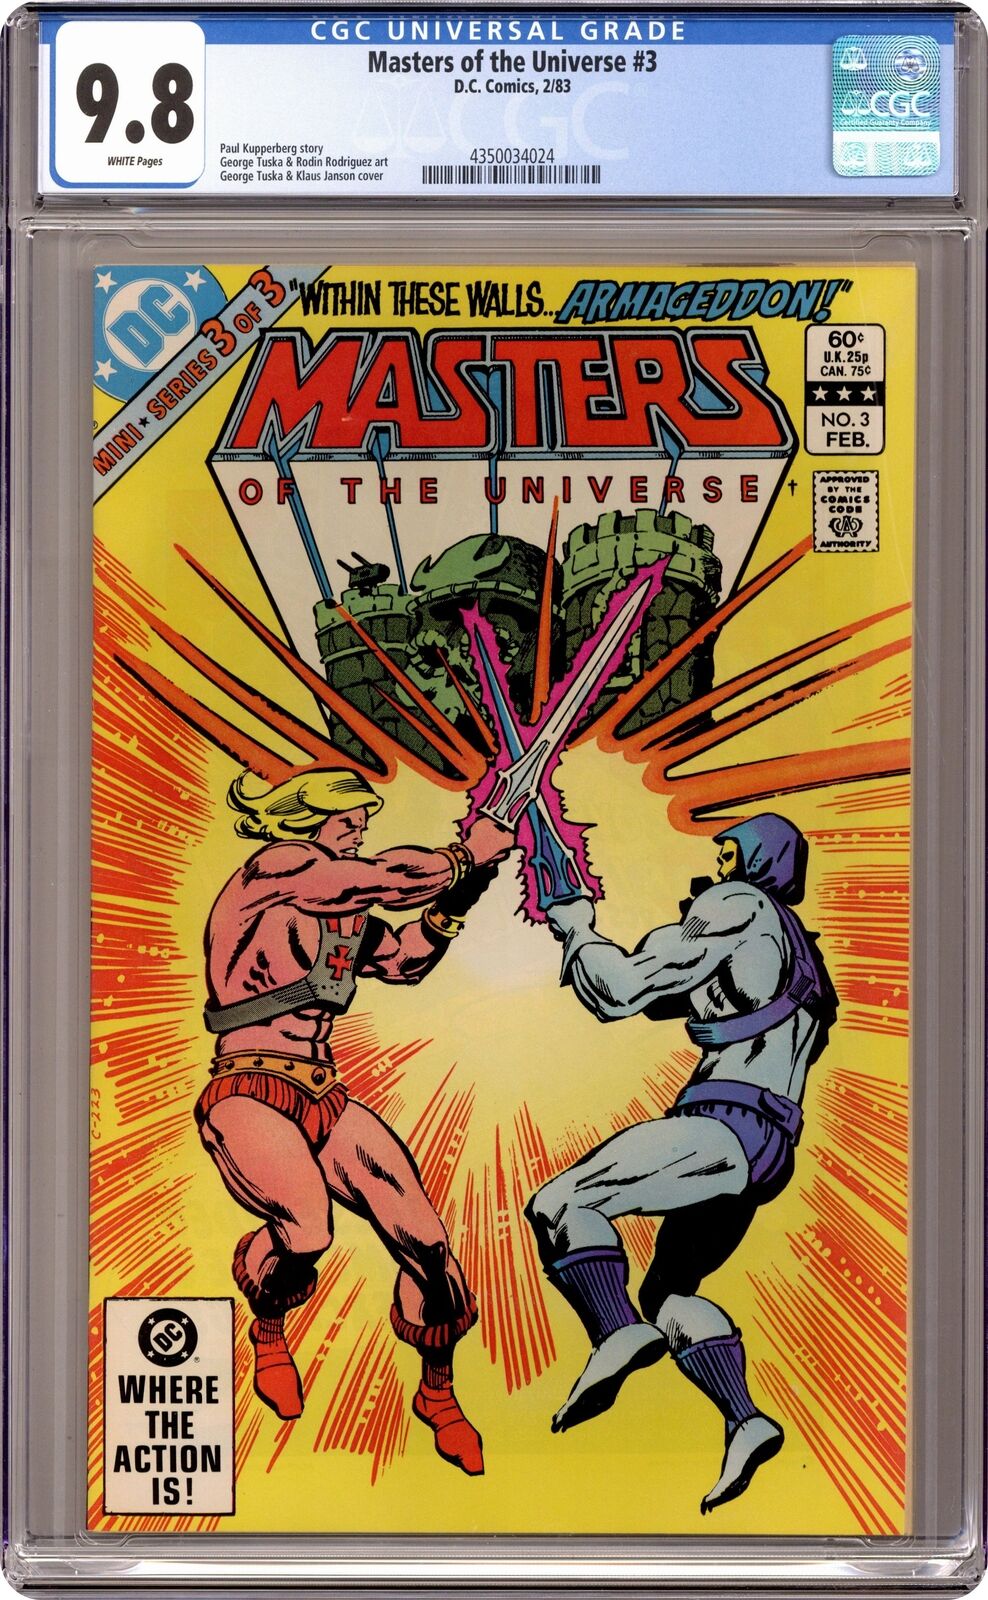 Masters of the Universe #3 CGC 9.8 1983 4350034024